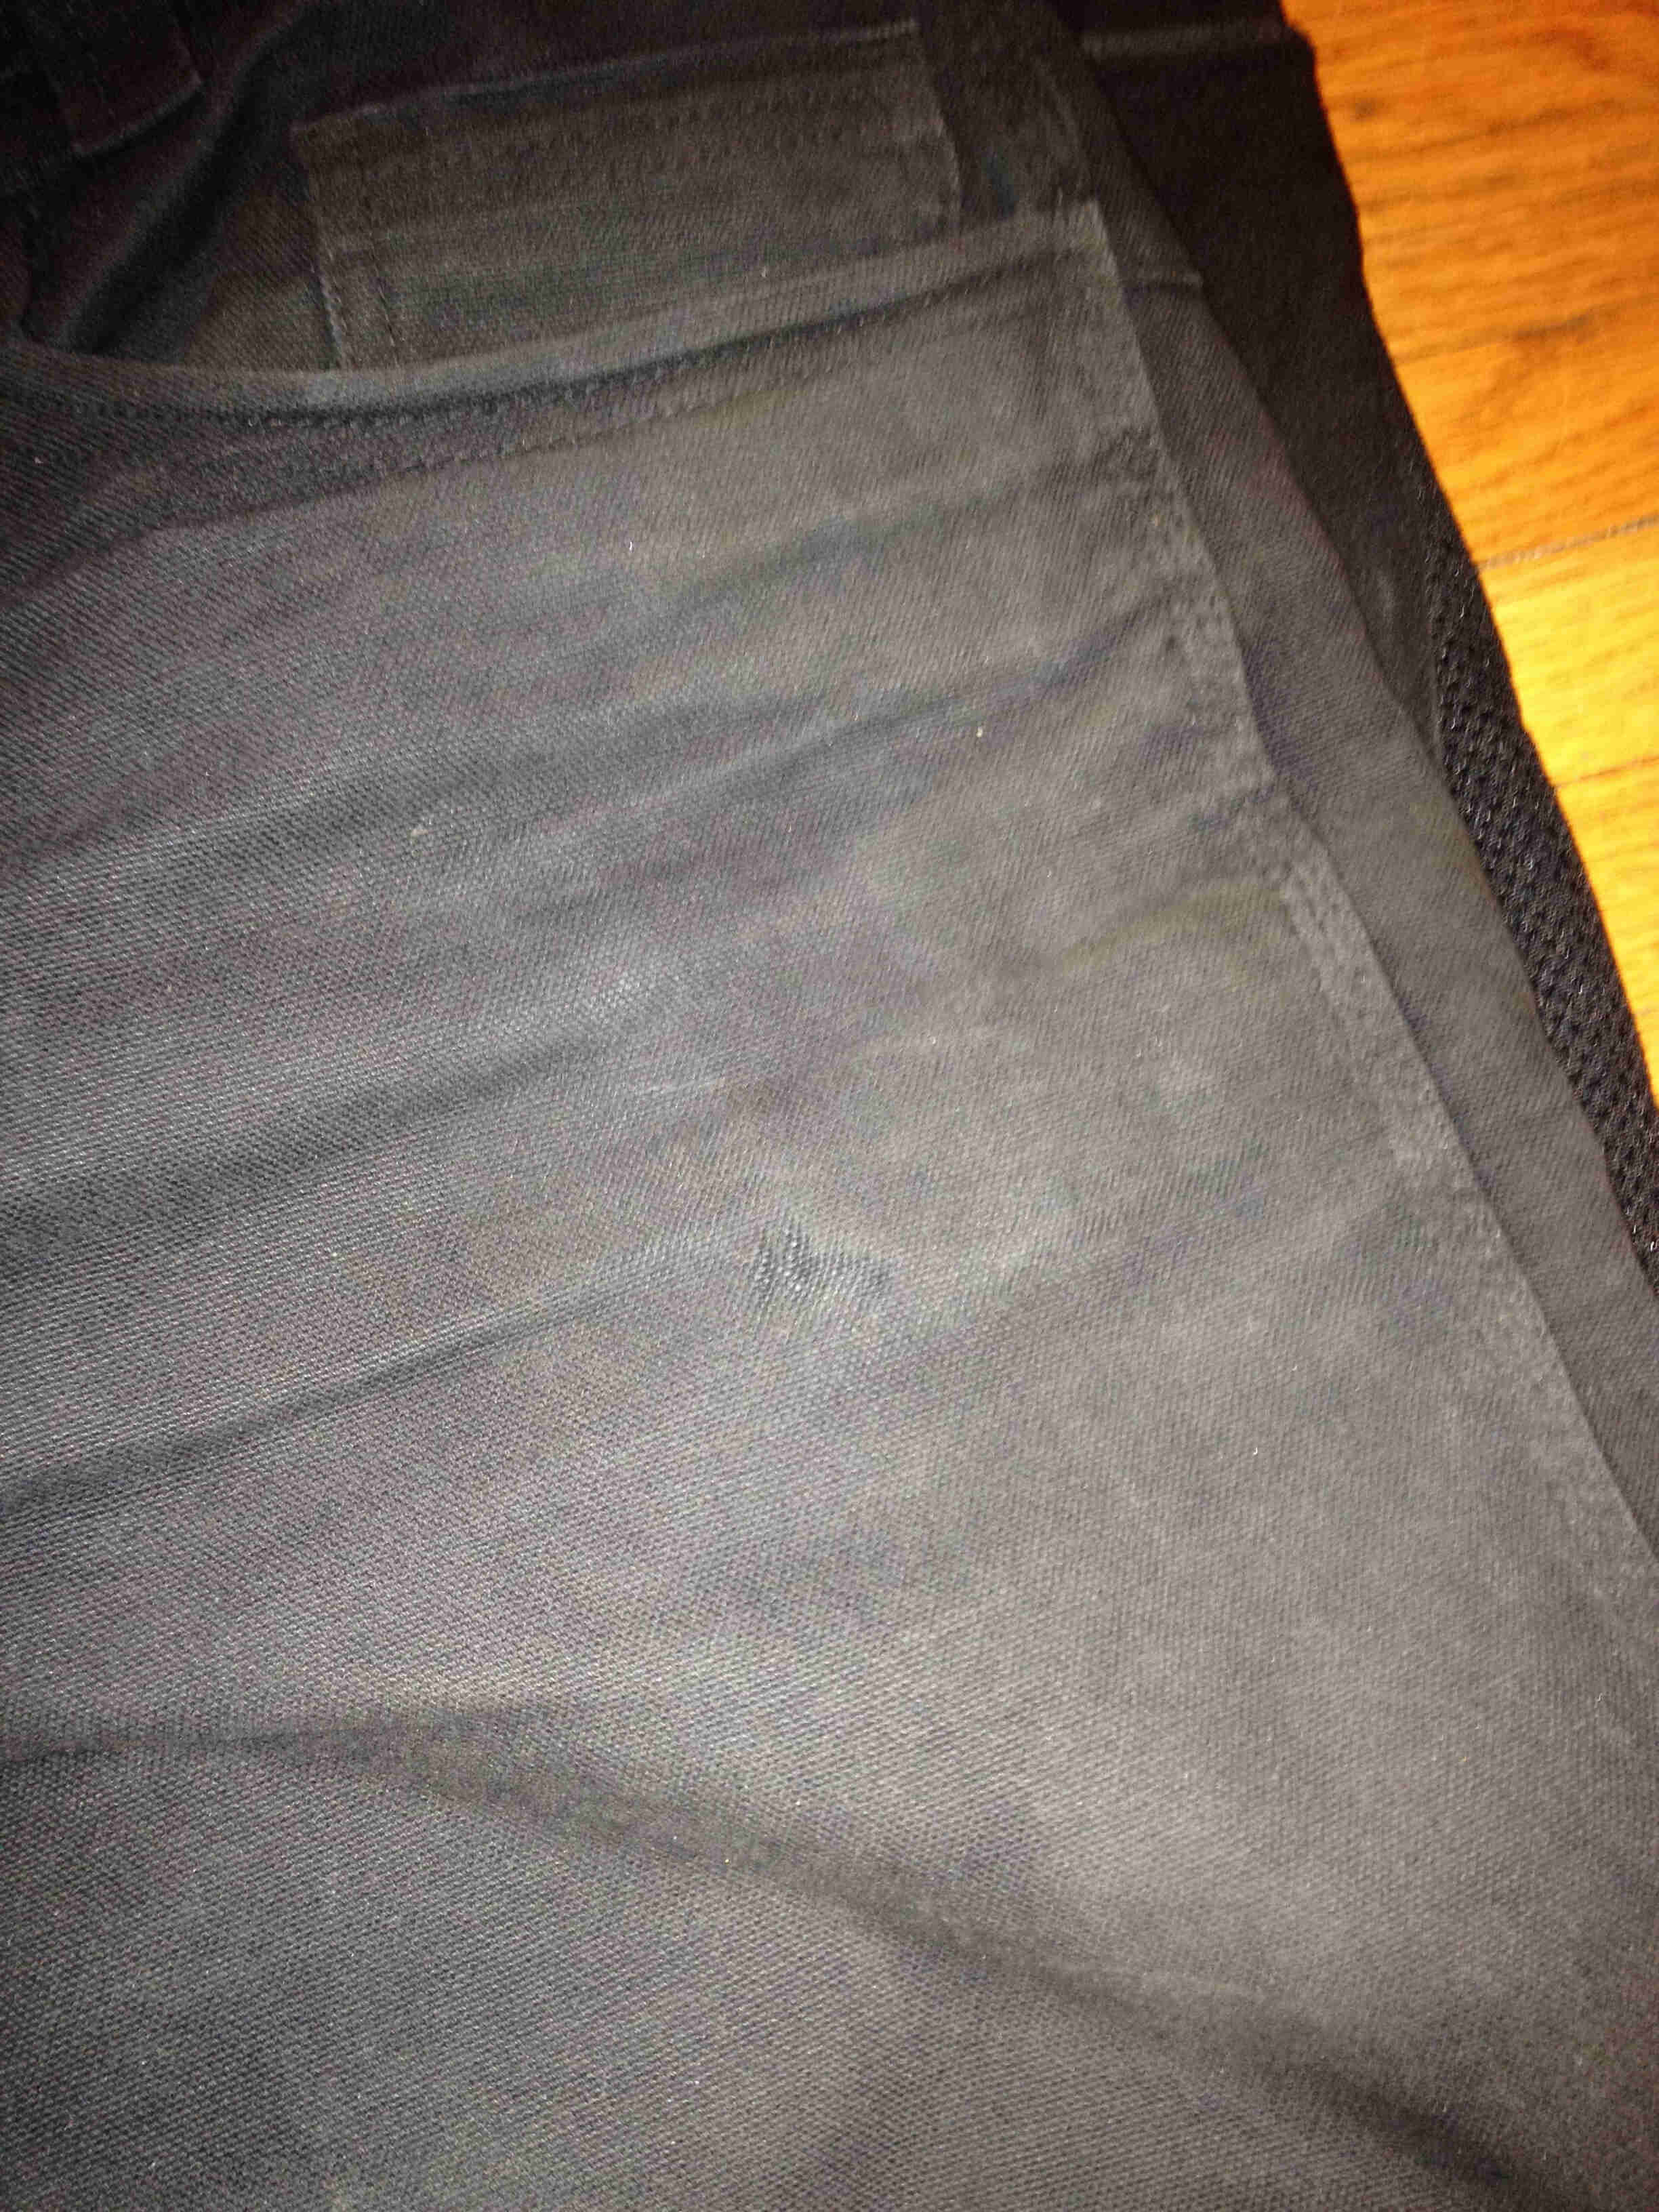 Downward, front, upper left side view of a pair of black Surly pants